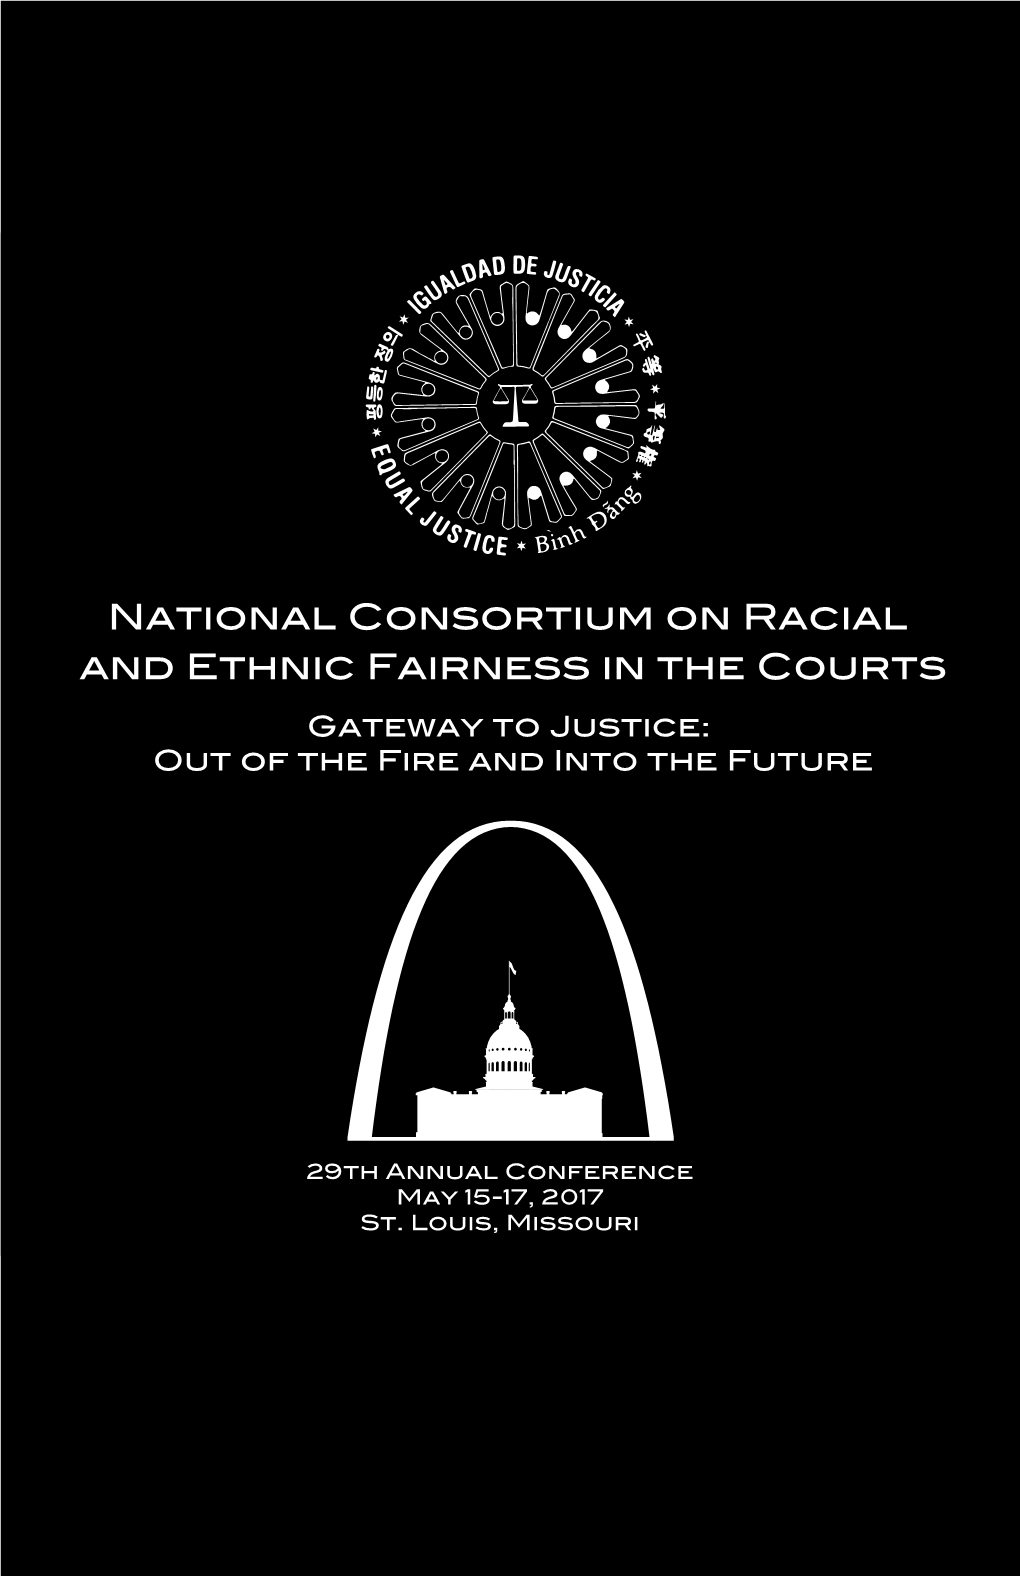 National Consortium on Racial and Ethnic Fairness in the Courts Gateway to Justice: out of the Fire and Into the Future